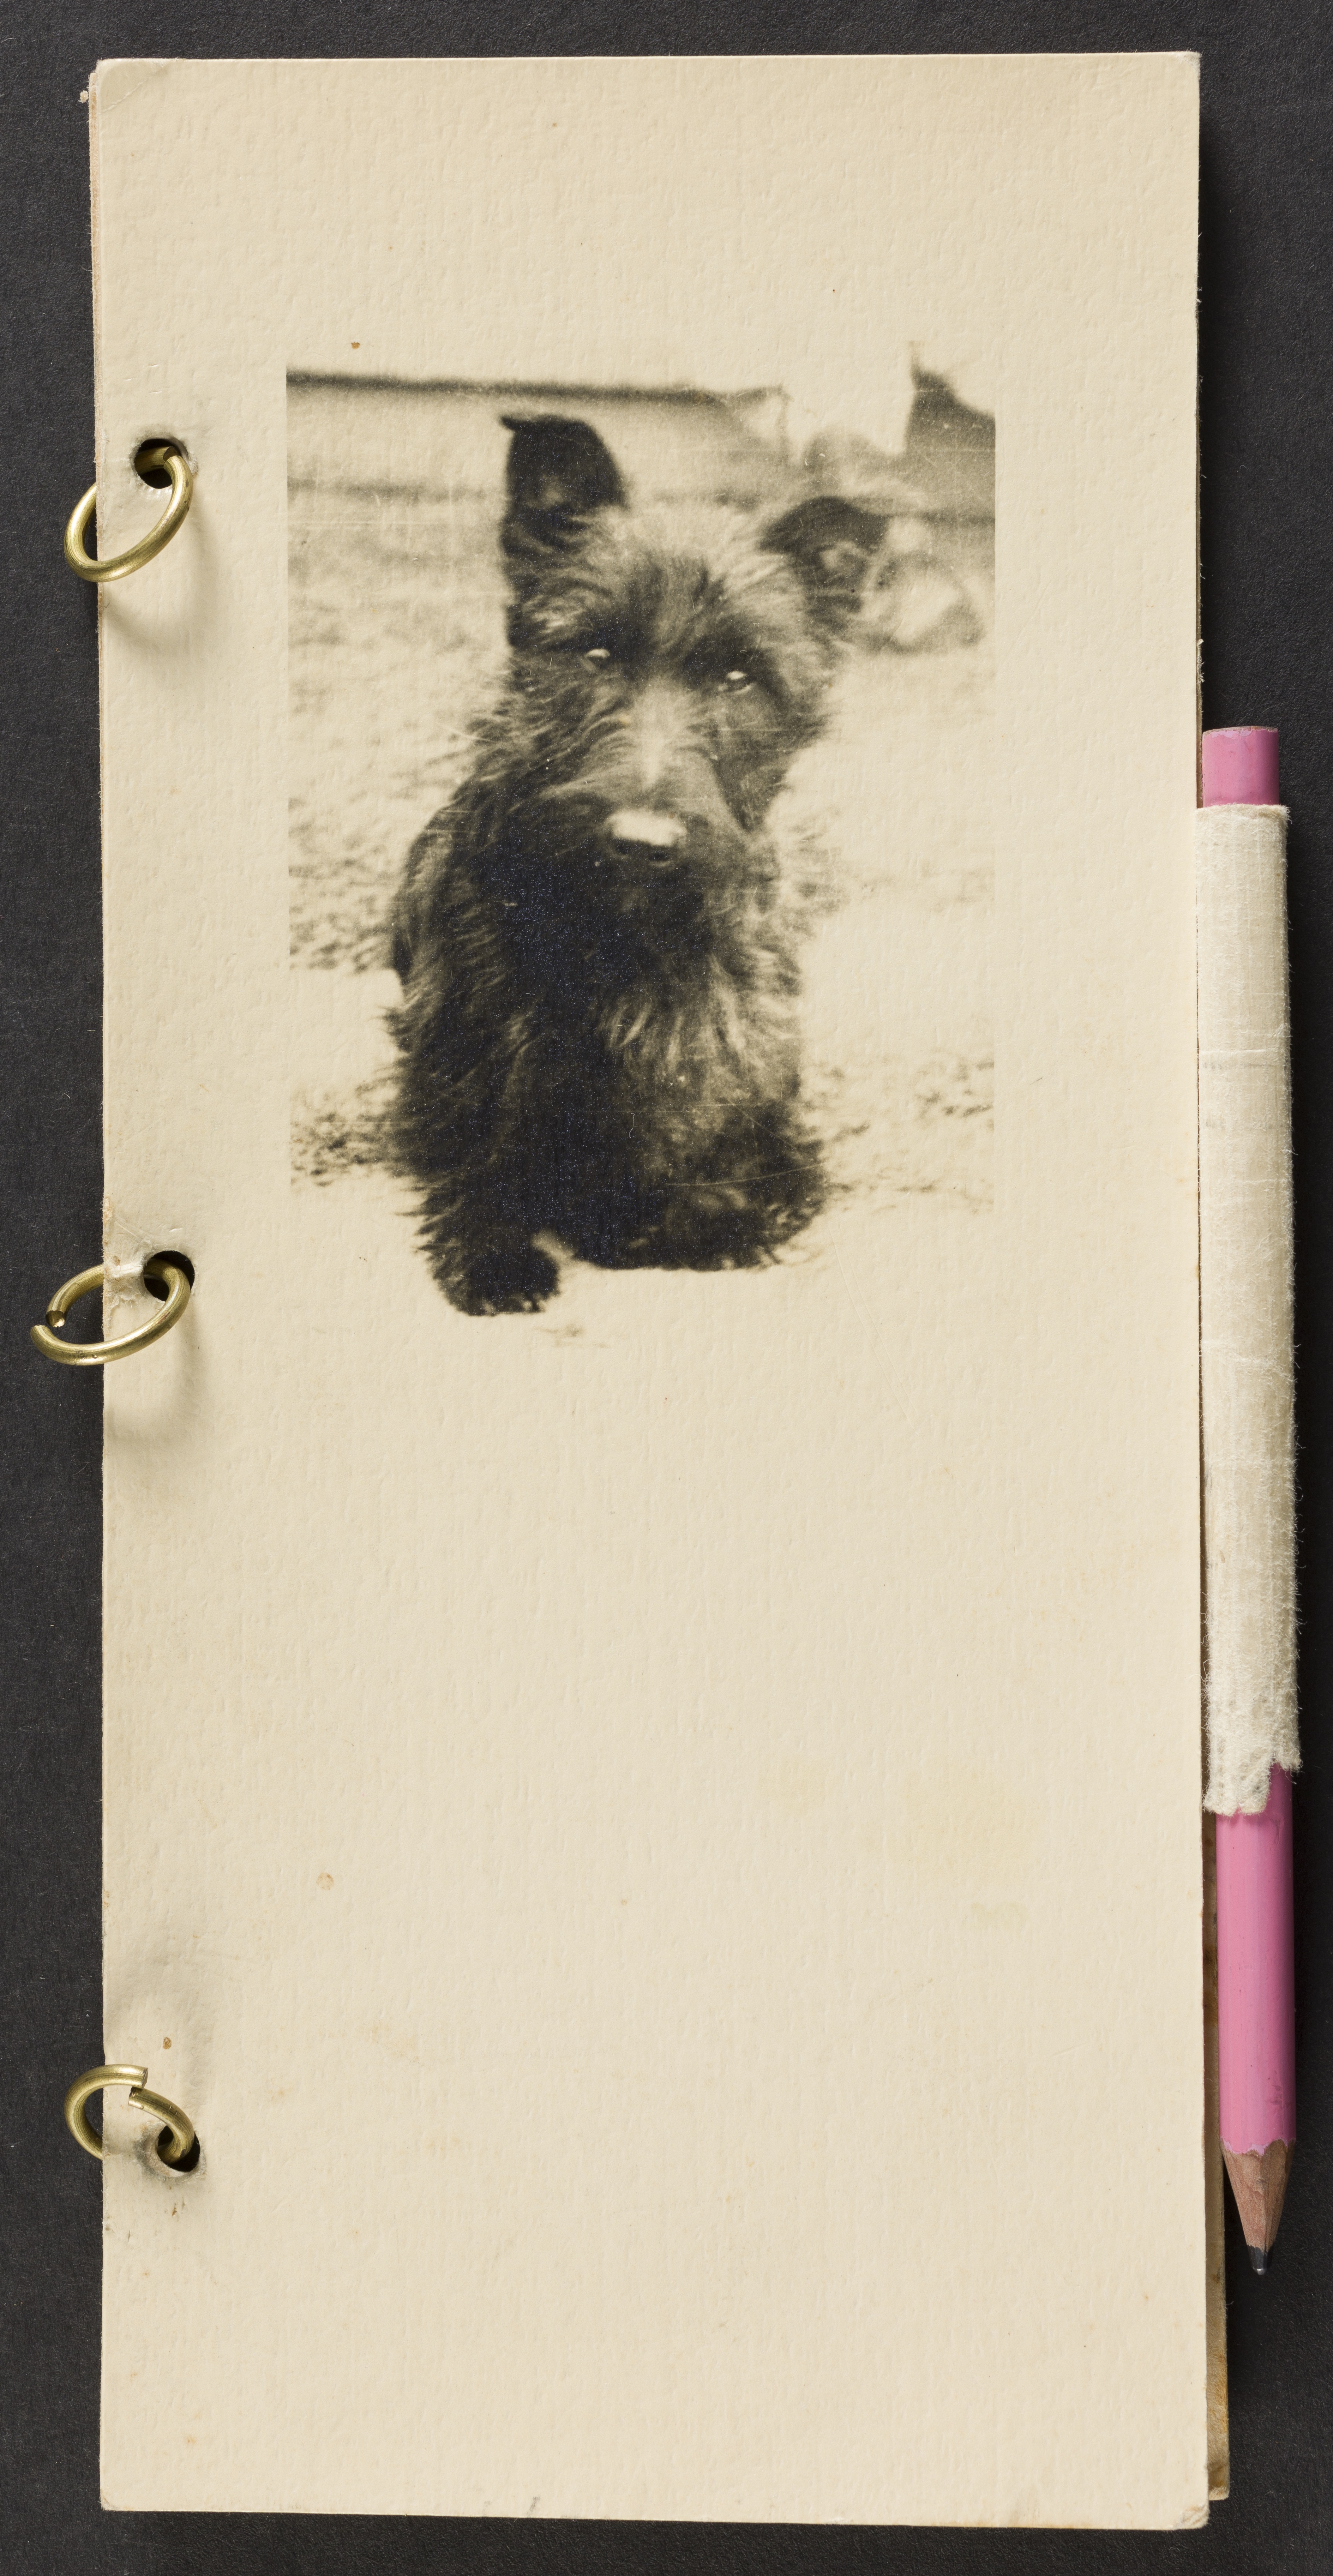 Card with Scottish Terrirr dog printed and 3 metal rings on spine and pencil holder holding pink pencil on right side